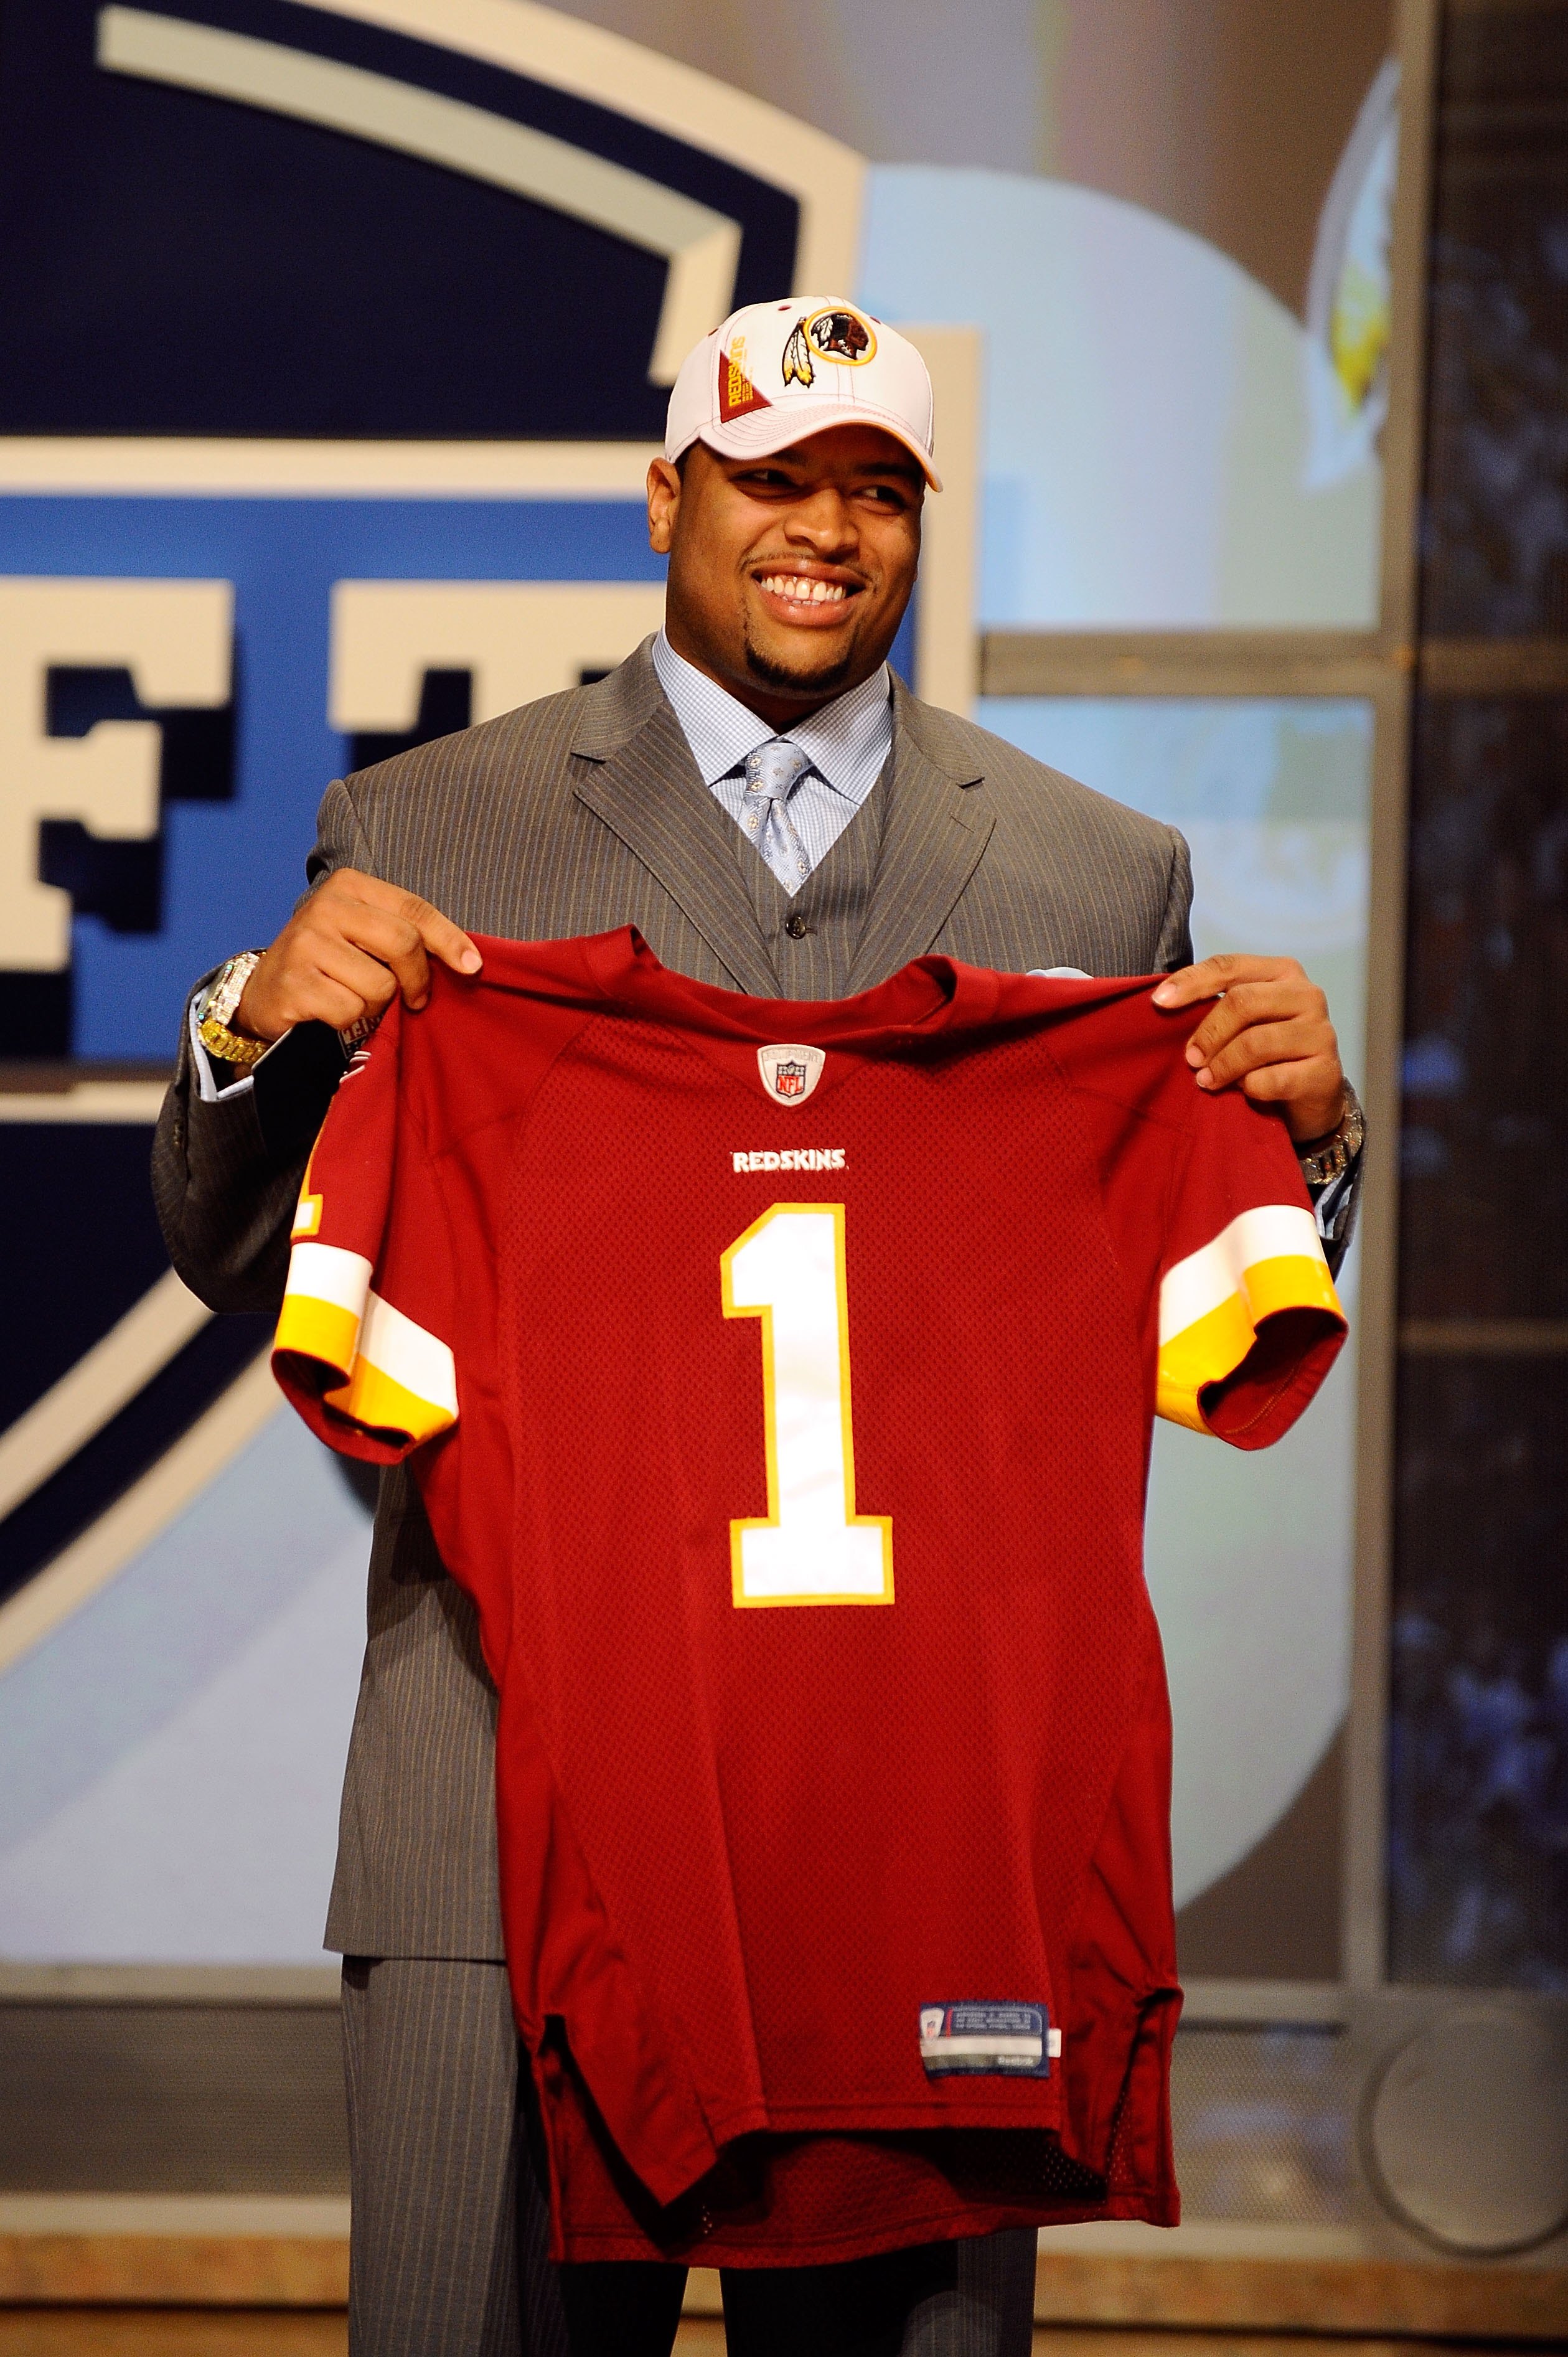 NEW YORK - APRIL 22:  Trent Williams from the Oklahoma Sooners holds a Washington Redskins jersey after Washington selected Williams number 4 overall during the first round of the 2010 NFL Draft at Radio City Music Hall on April 22, 2010 in New York City.